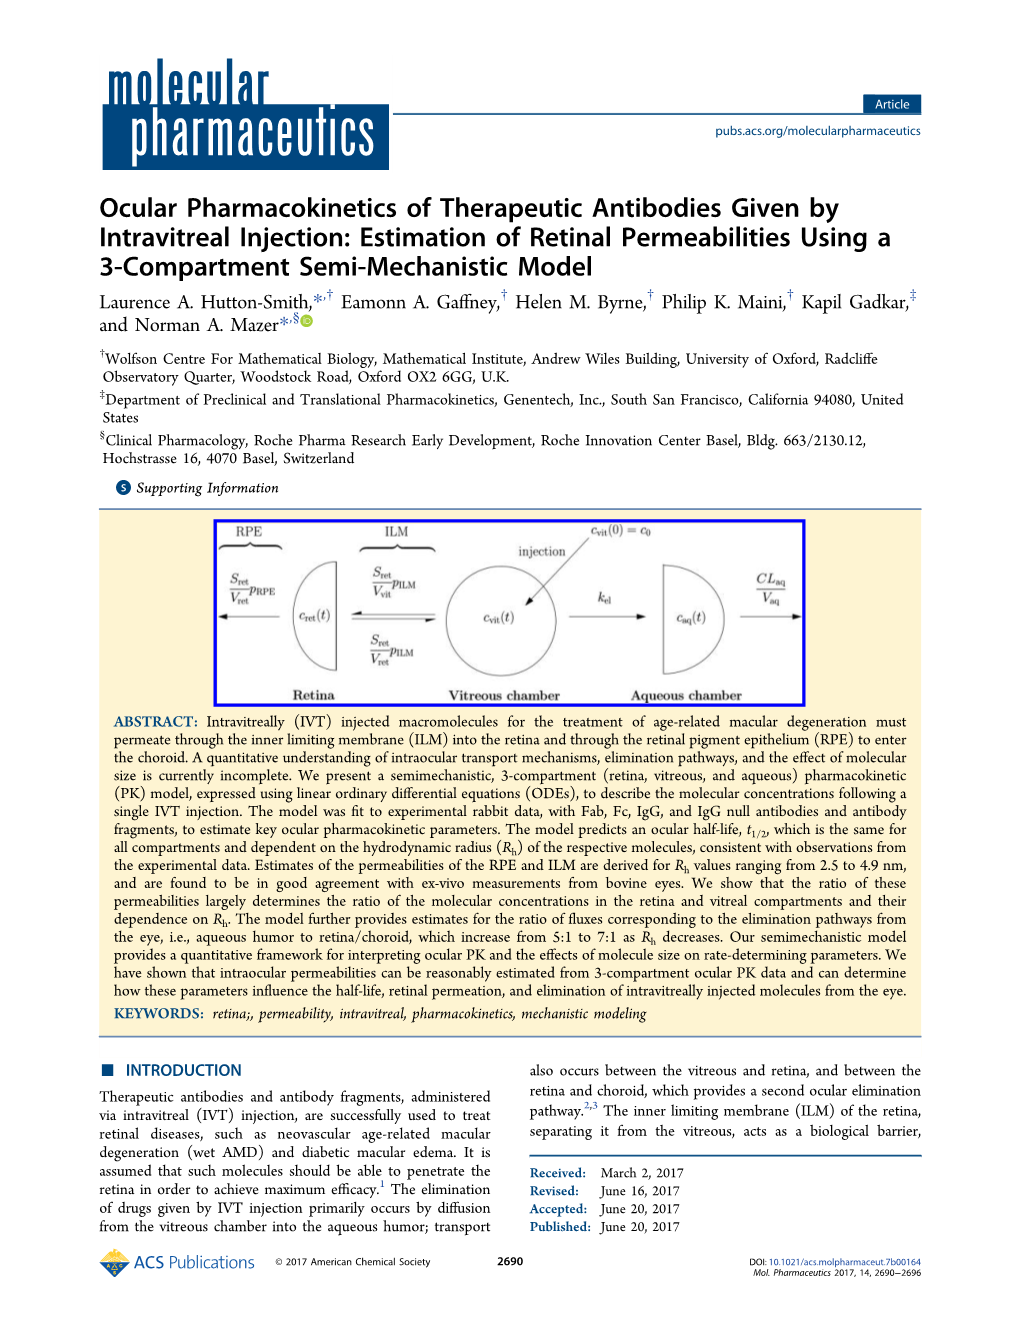 Ocular Pharmacokinetics of Therapeutic Antibodies Given By